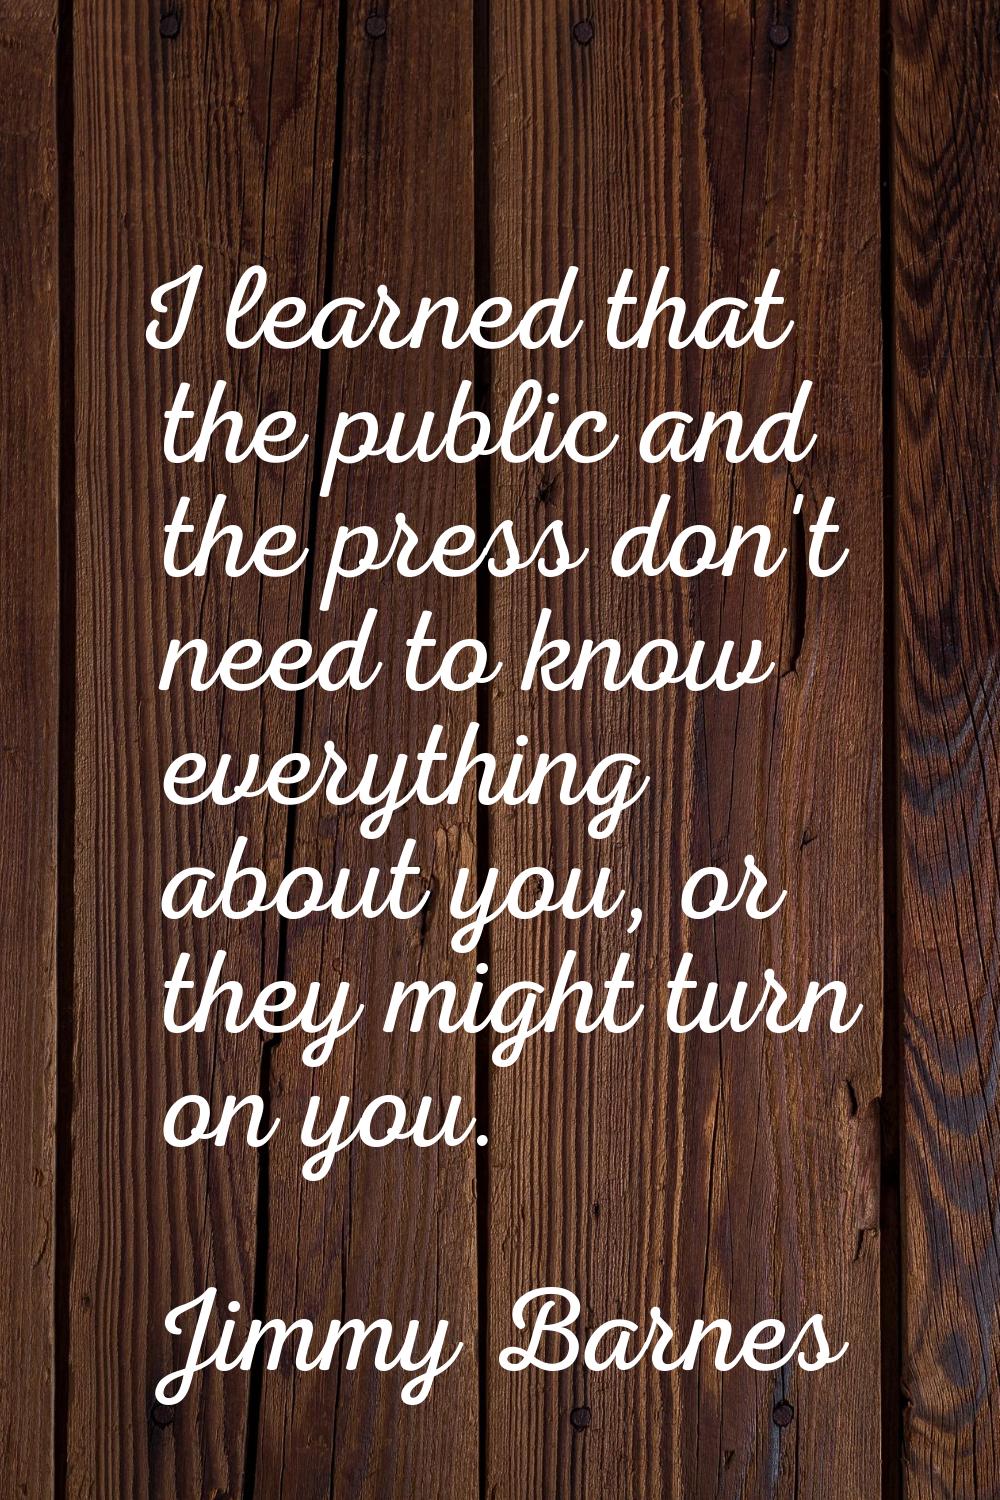 I learned that the public and the press don't need to know everything about you, or they might turn